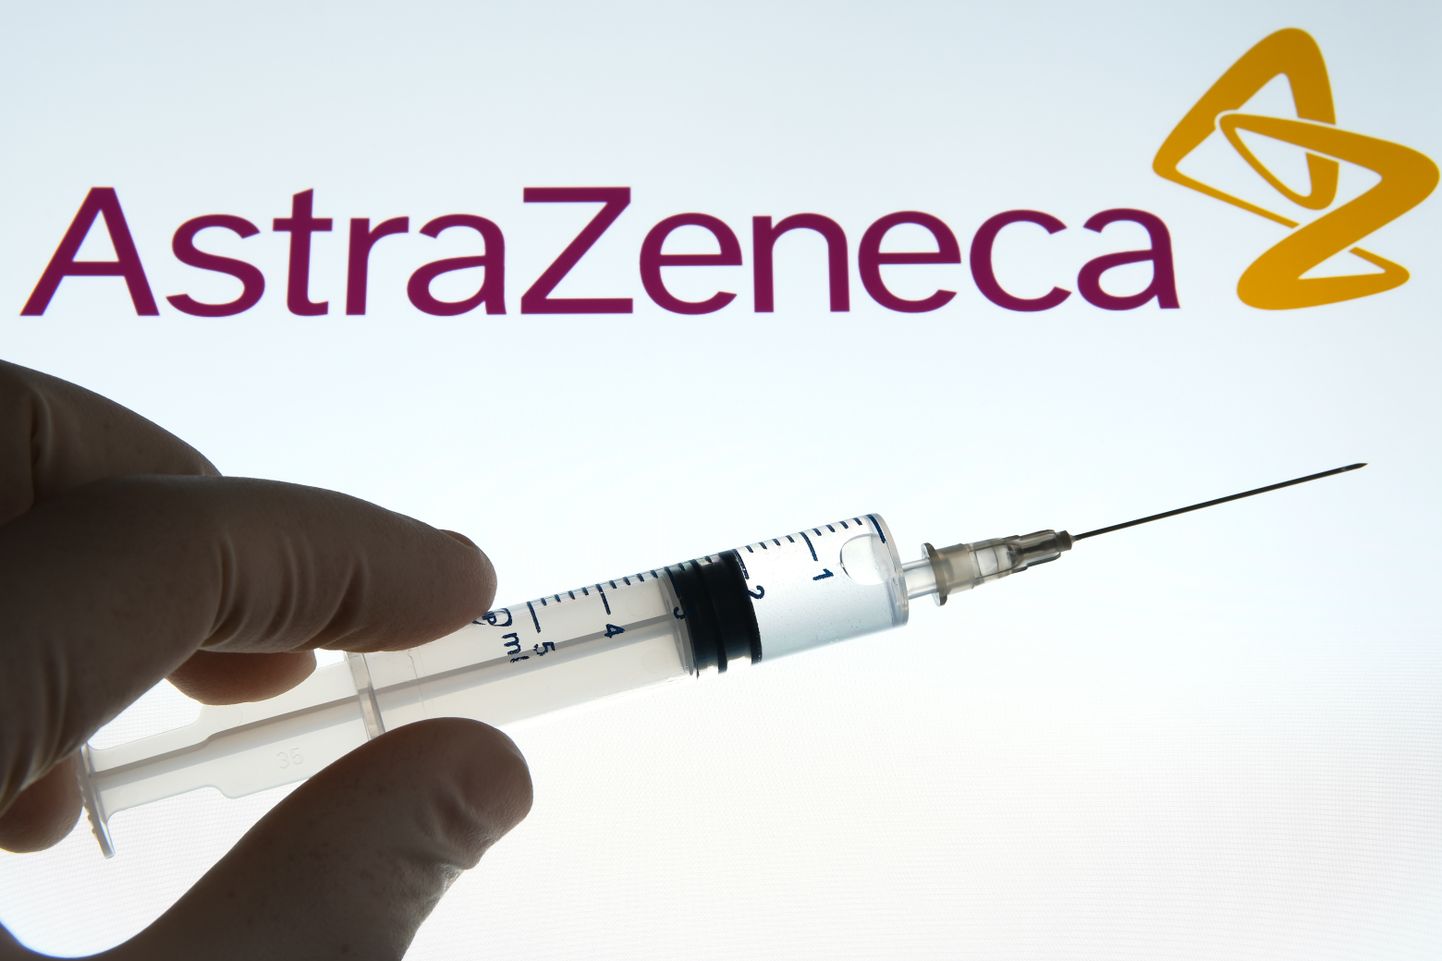 Estonia signed officially one pre-purchase contract with AstraZeneca, while there are six other vaccine manufacturers preparing vaccines based on different technologies.